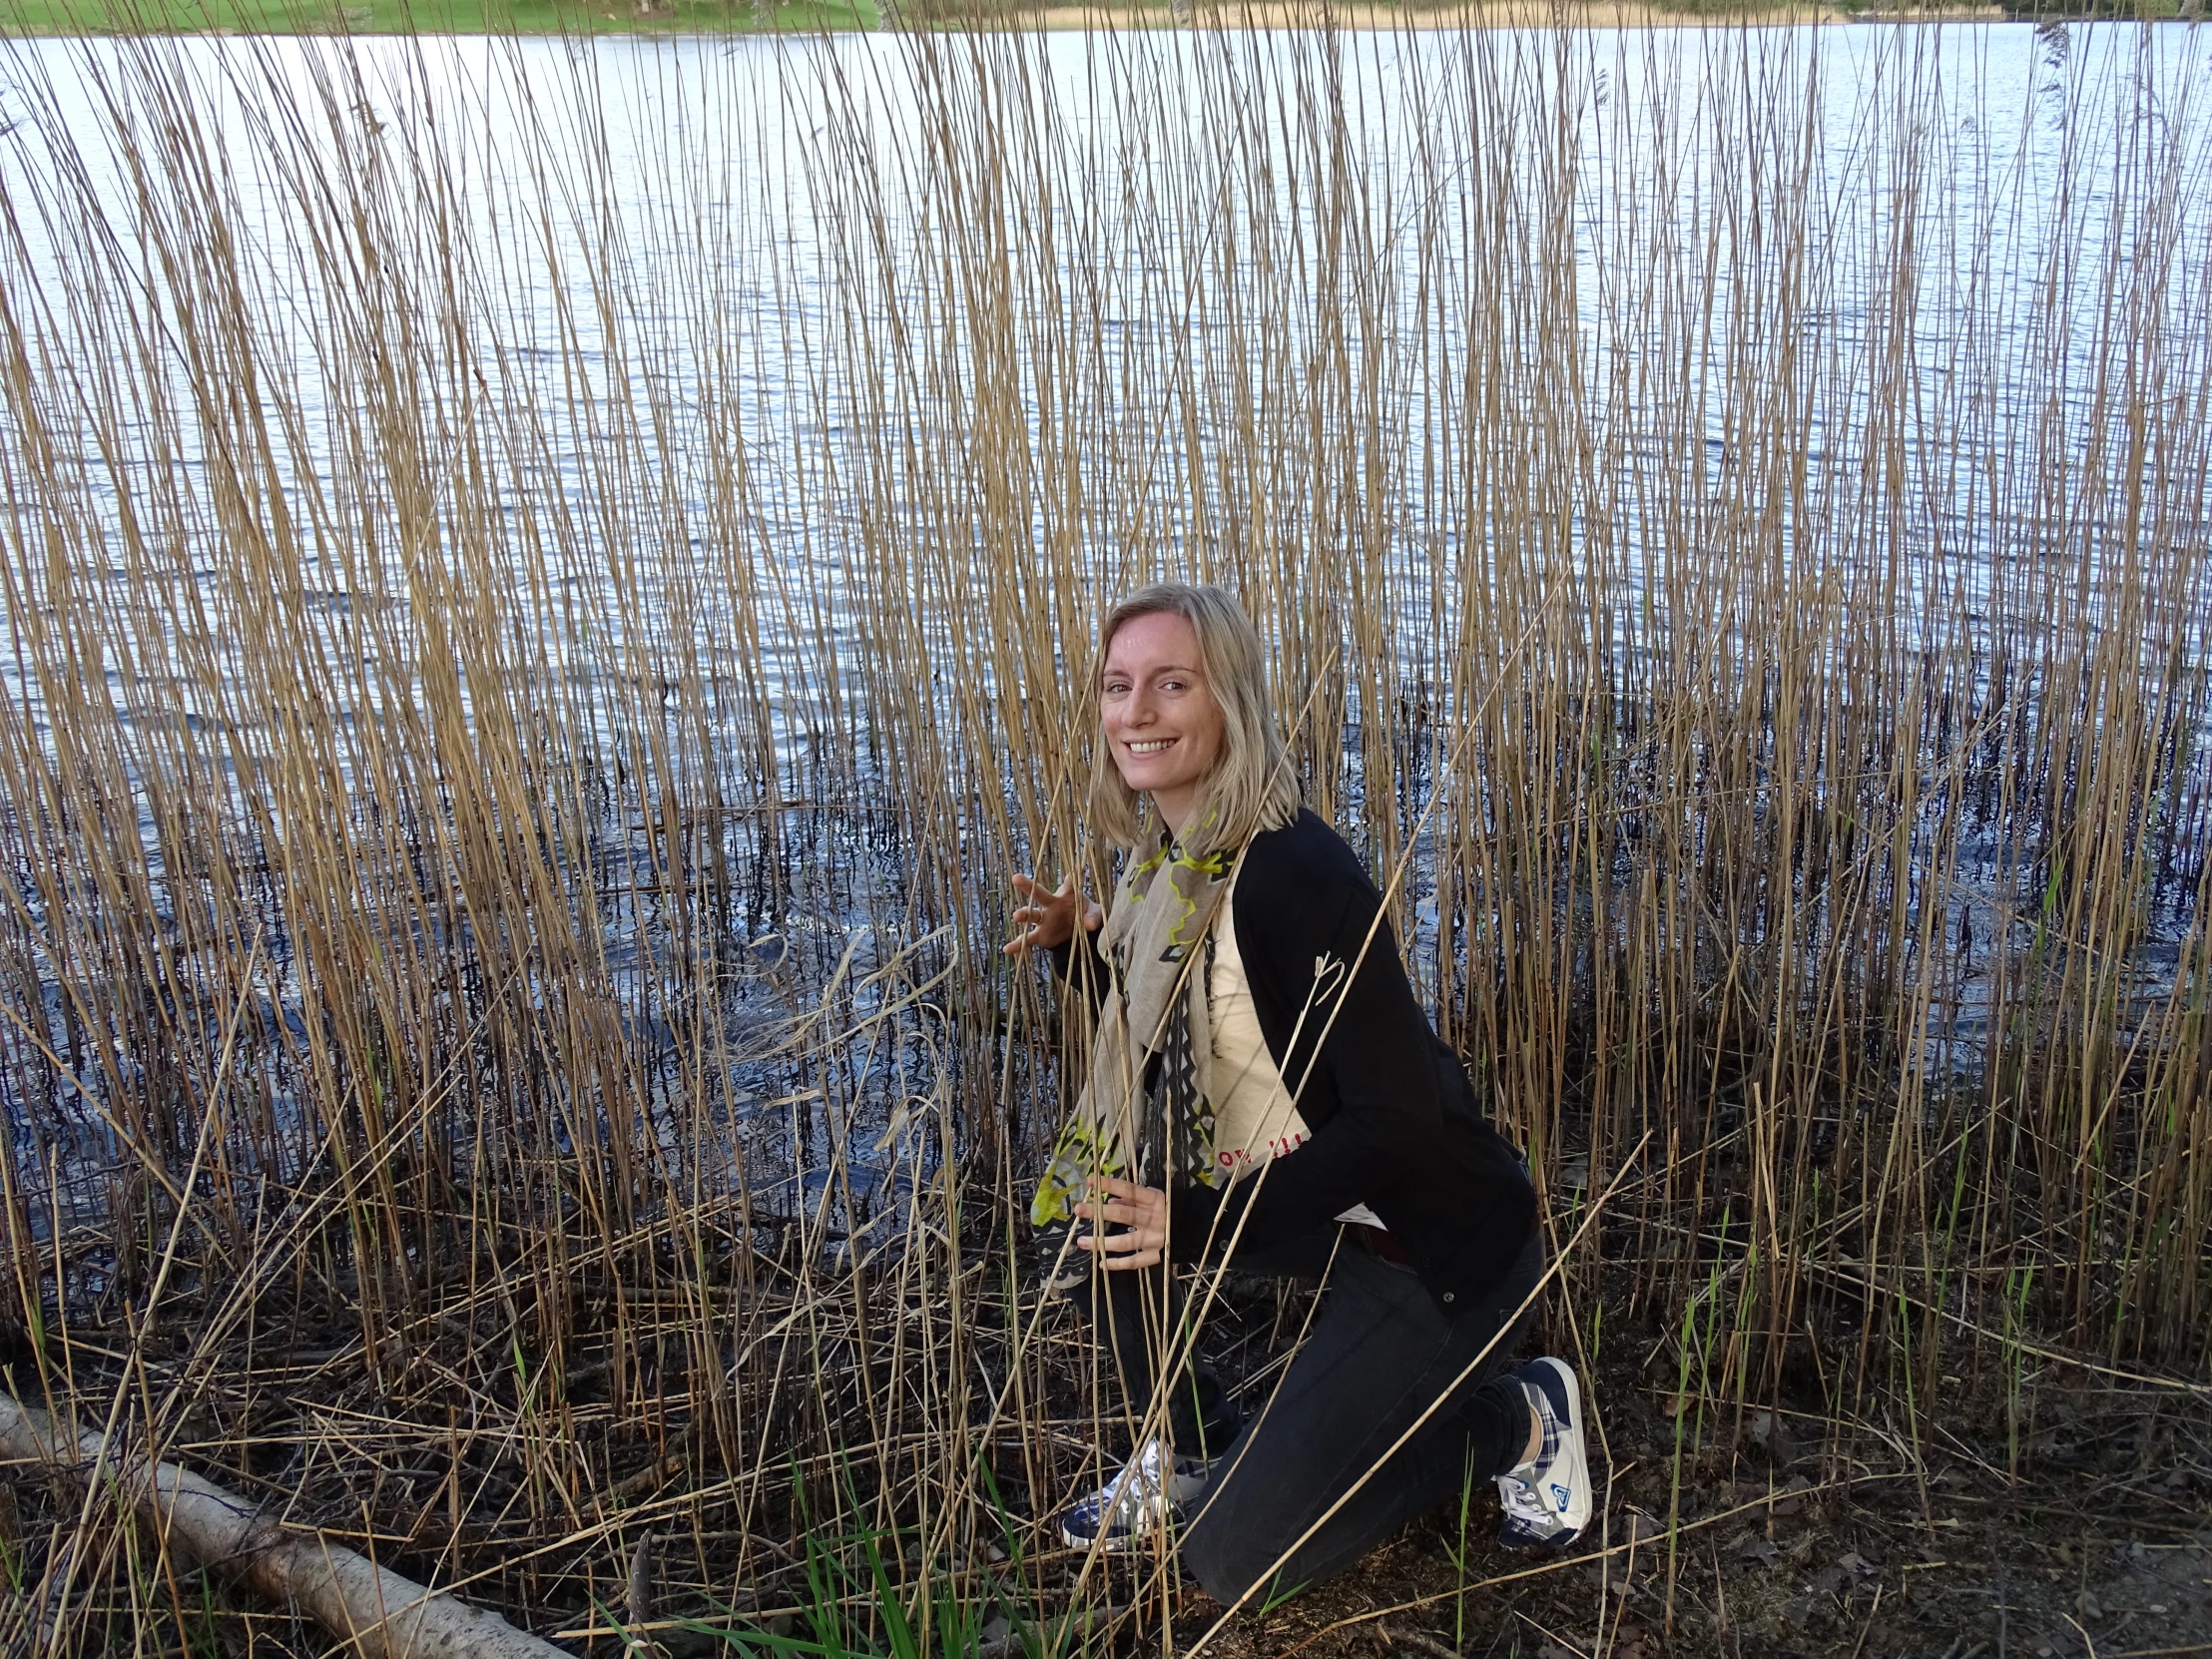 a smiling blonde woman crouched over plants by the water